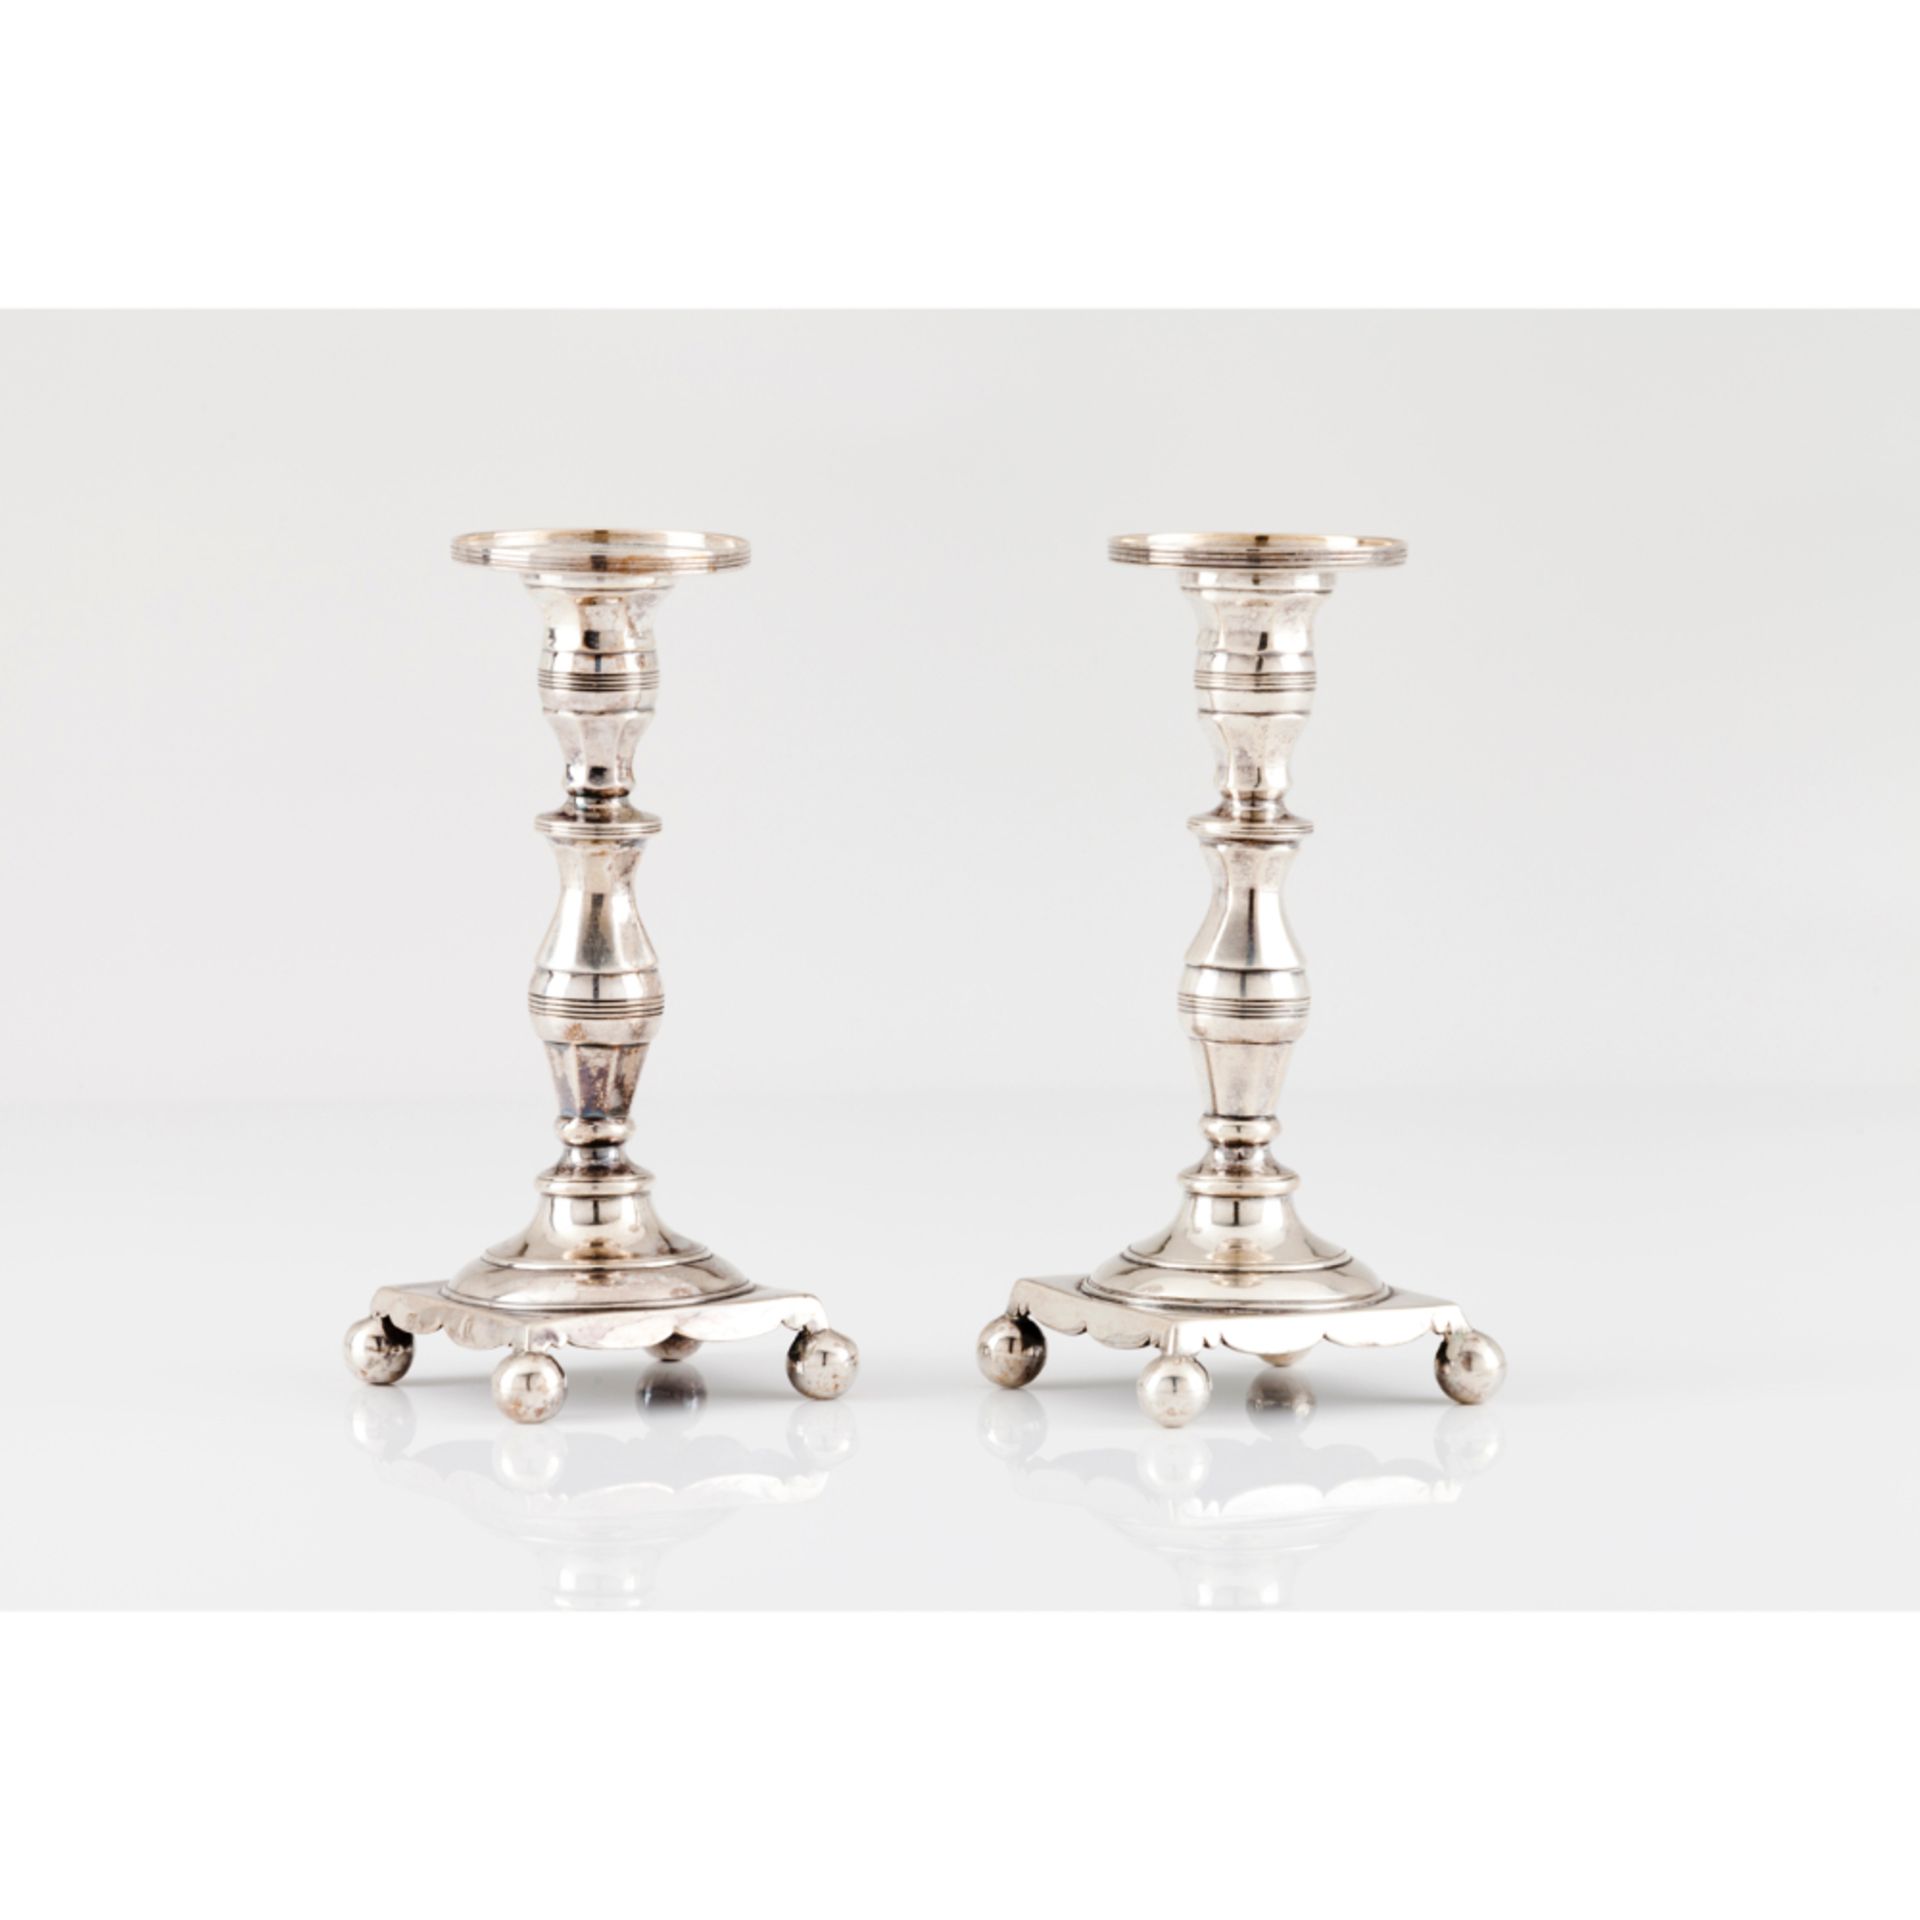 A pair of small candle sticksPortuguese silver, 19th century Turned and striated decoration On